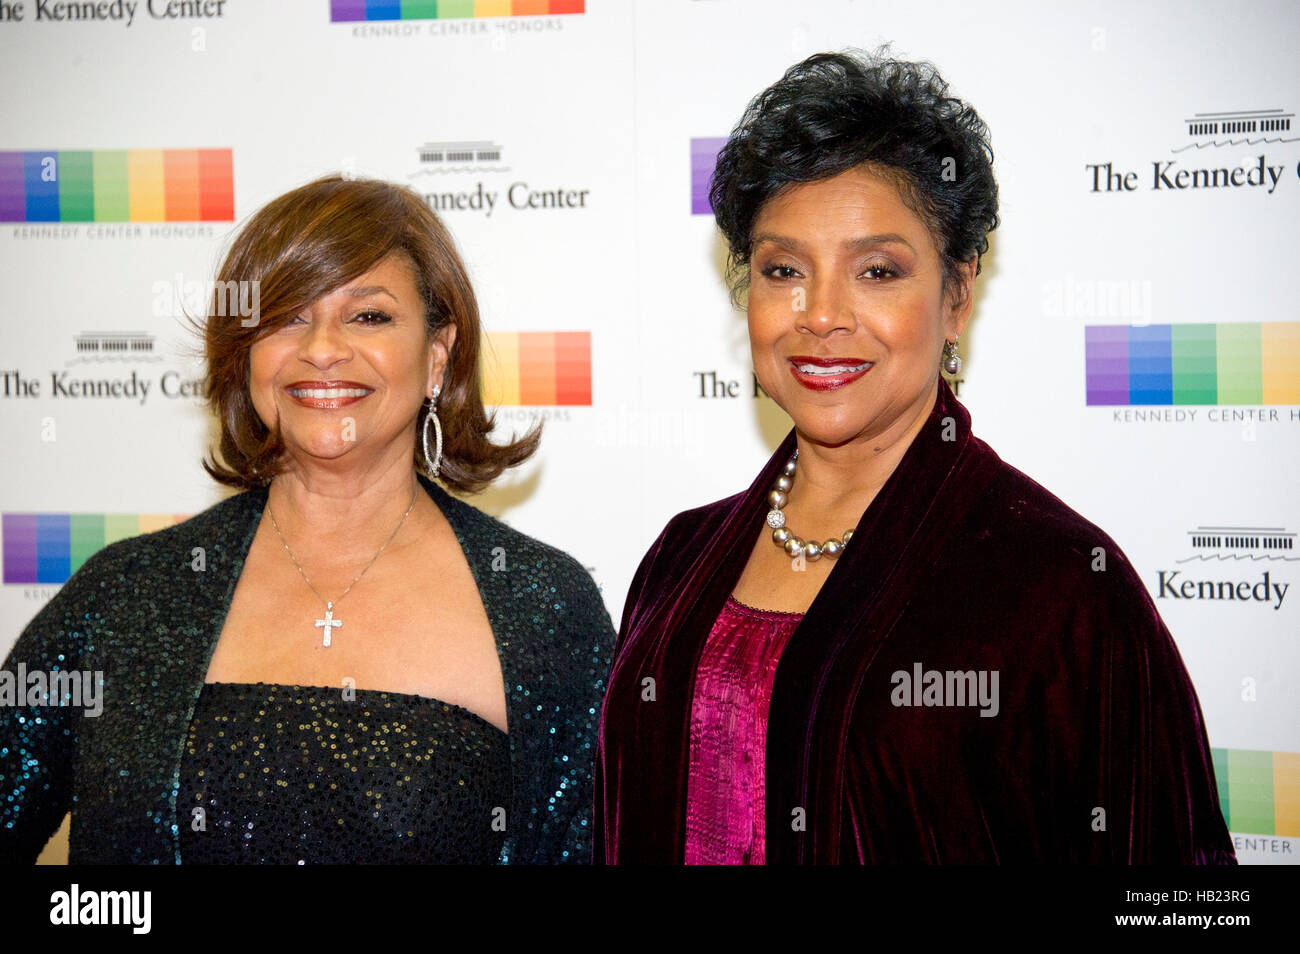 Washington DC, USA. 3rd Dec, 2016. Actress Debbie Allen and her sister, Phylicia Rashad arrive for the formal Artist's Dinner honoring the recipients of the 39th Annual Kennedy Center Honors hosted by United States Secretary of State John F. Kerry at the U.S. Department of State in Washington, DC on Saturday, December 3, 2016. The 2016 honorees are: Argentine pianist Martha Argerich; rock band the Eagles; screen and stage actor Al Pacino; gospel and blues singer Mavis Staples; and musician James Taylor. Credit:  MediaPunch Inc/Alamy Live News Stock Photo